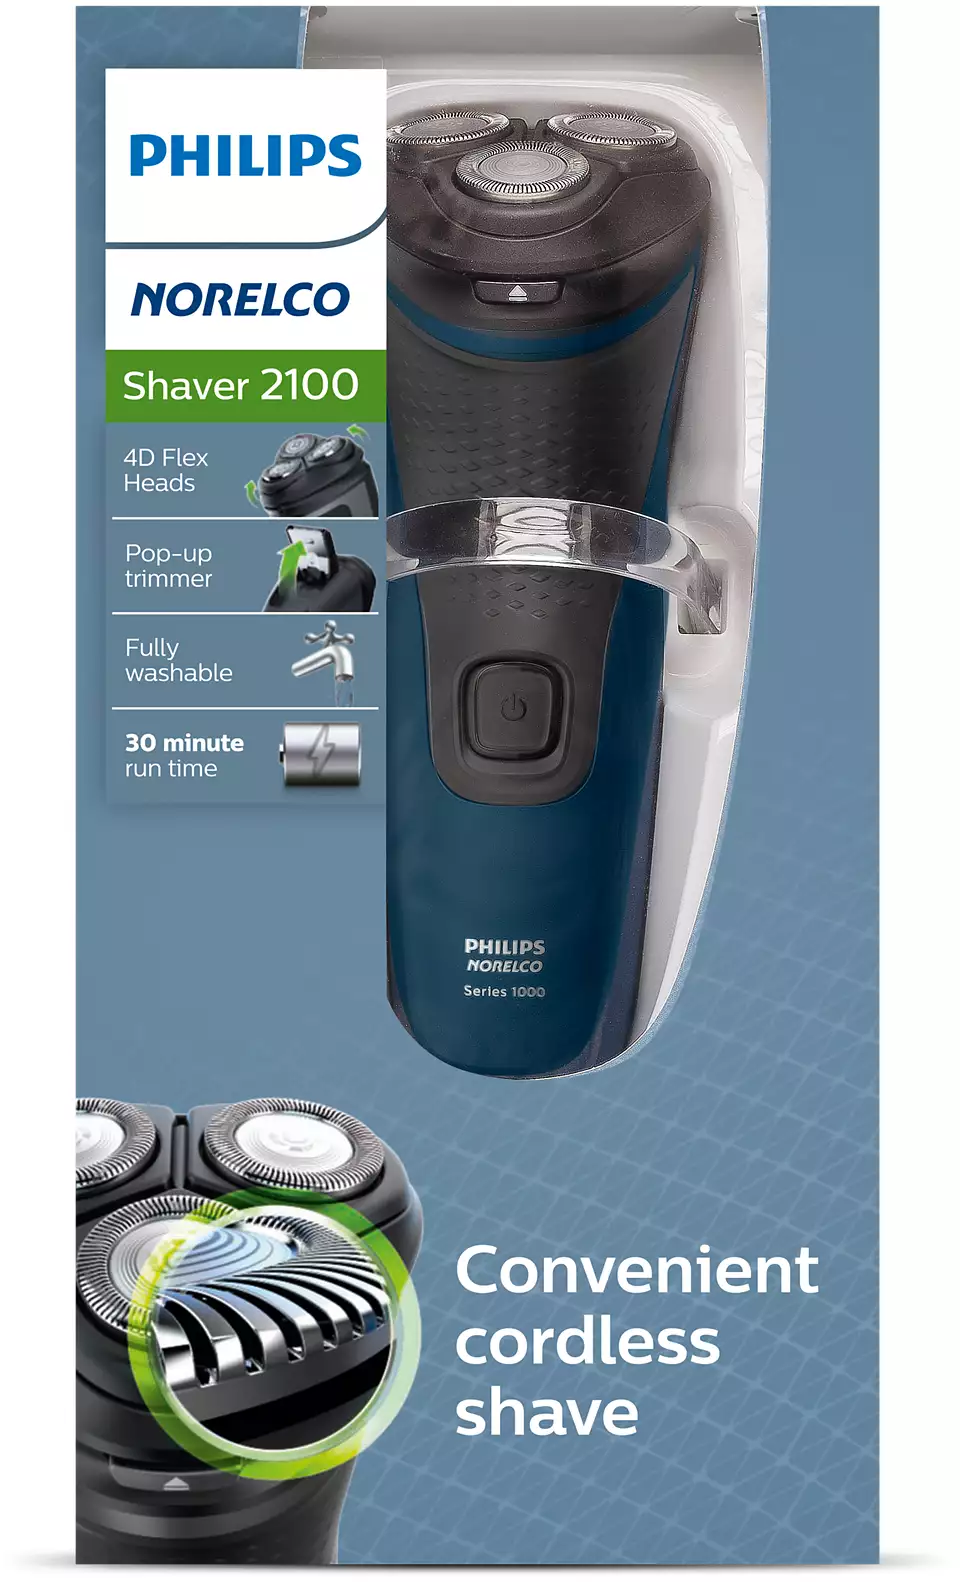 New Philips Norelco Electric shaver